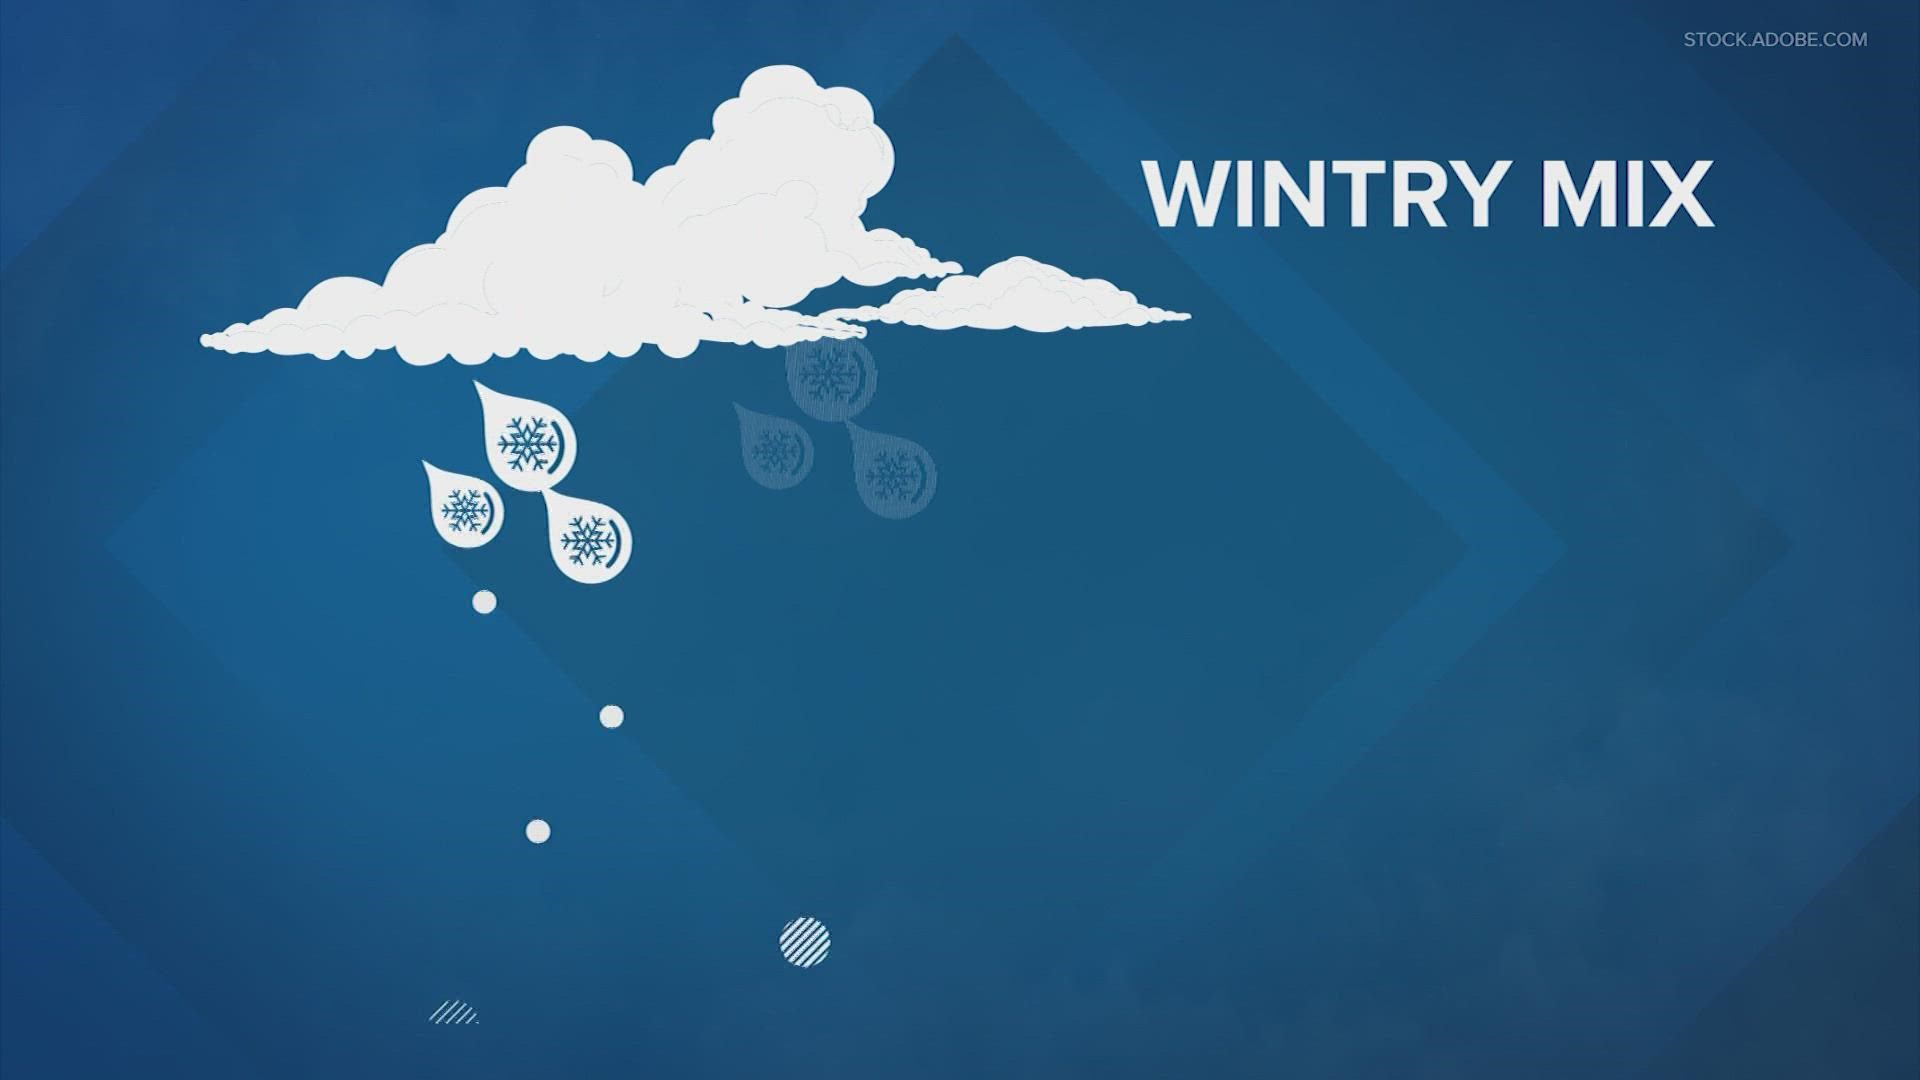 Wintry mix is a combination of several kinds of winter precipitation. There are several factors that lead to it.